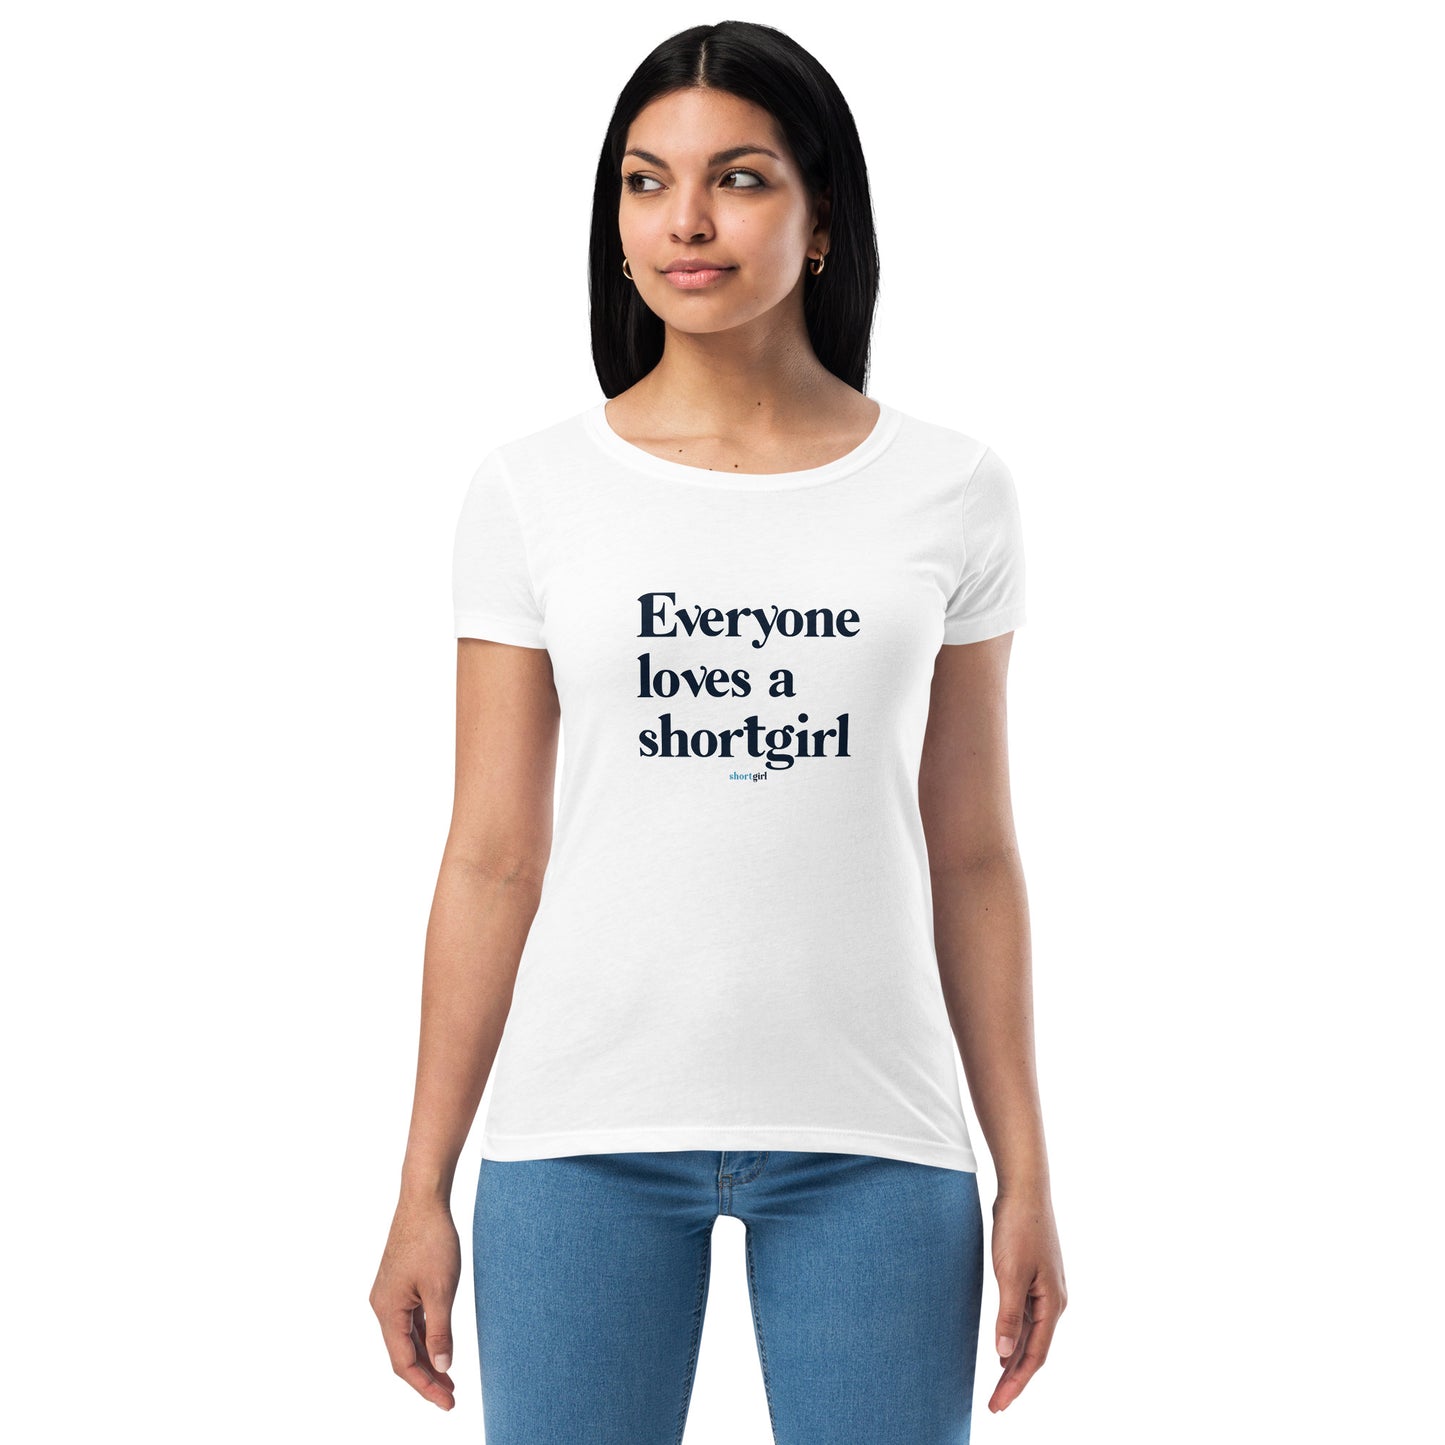 Women’s fitted t-shirt - Everyone Loves a shortgirl